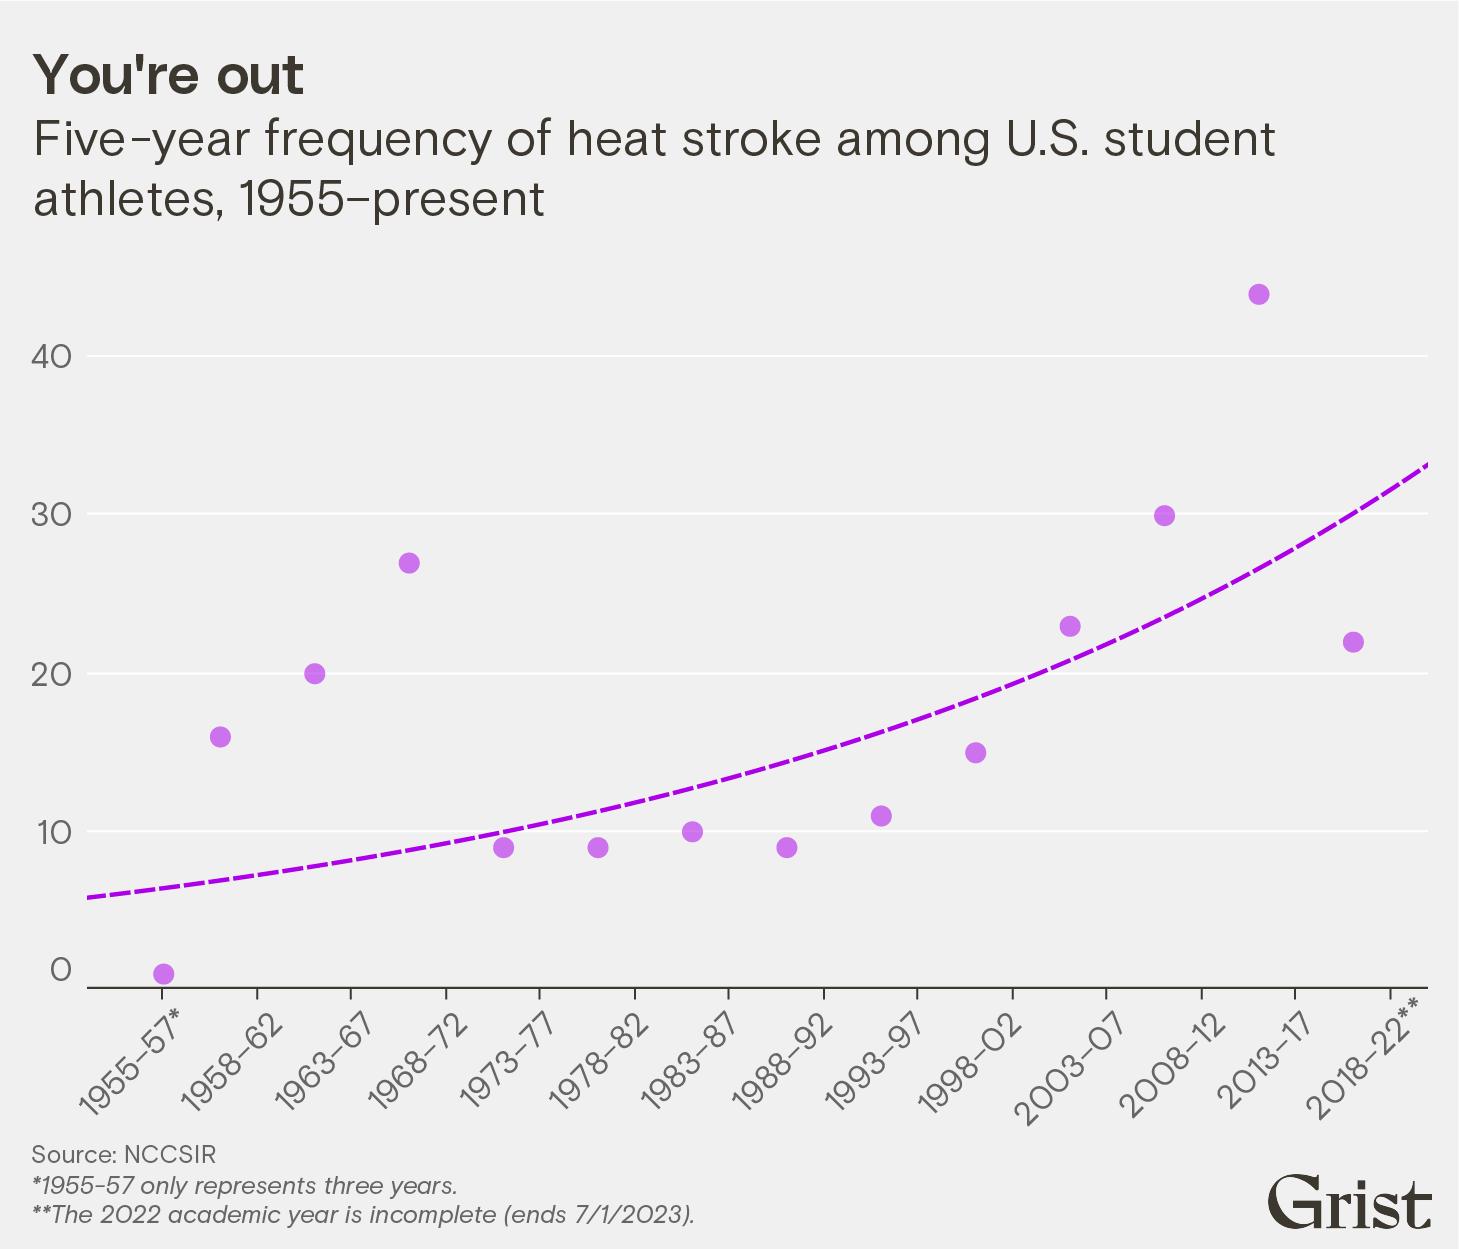 A scatter plot showing the five-year frequency of heat stroke among U.S. student athletes from 1955 to the present. A purple dashed line shows the trend has increased exponentially over this time period.